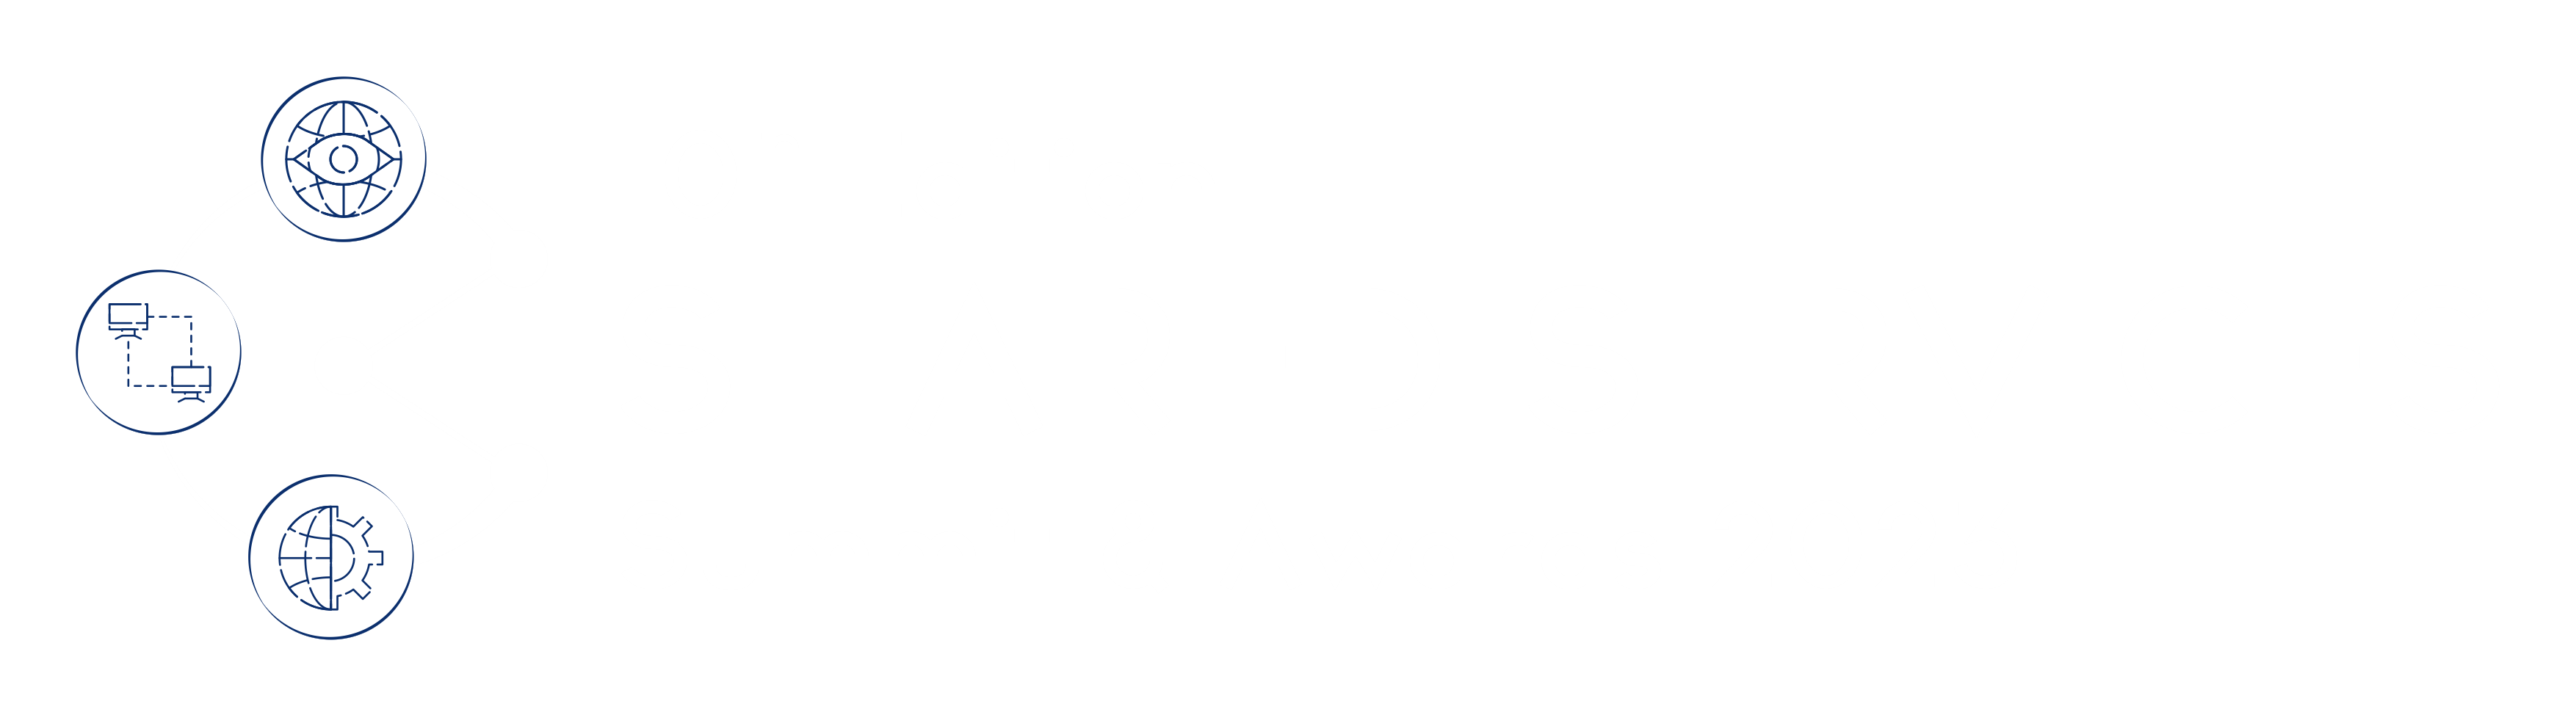 10th Edition Shared Services Summit & Awards 2023 logo